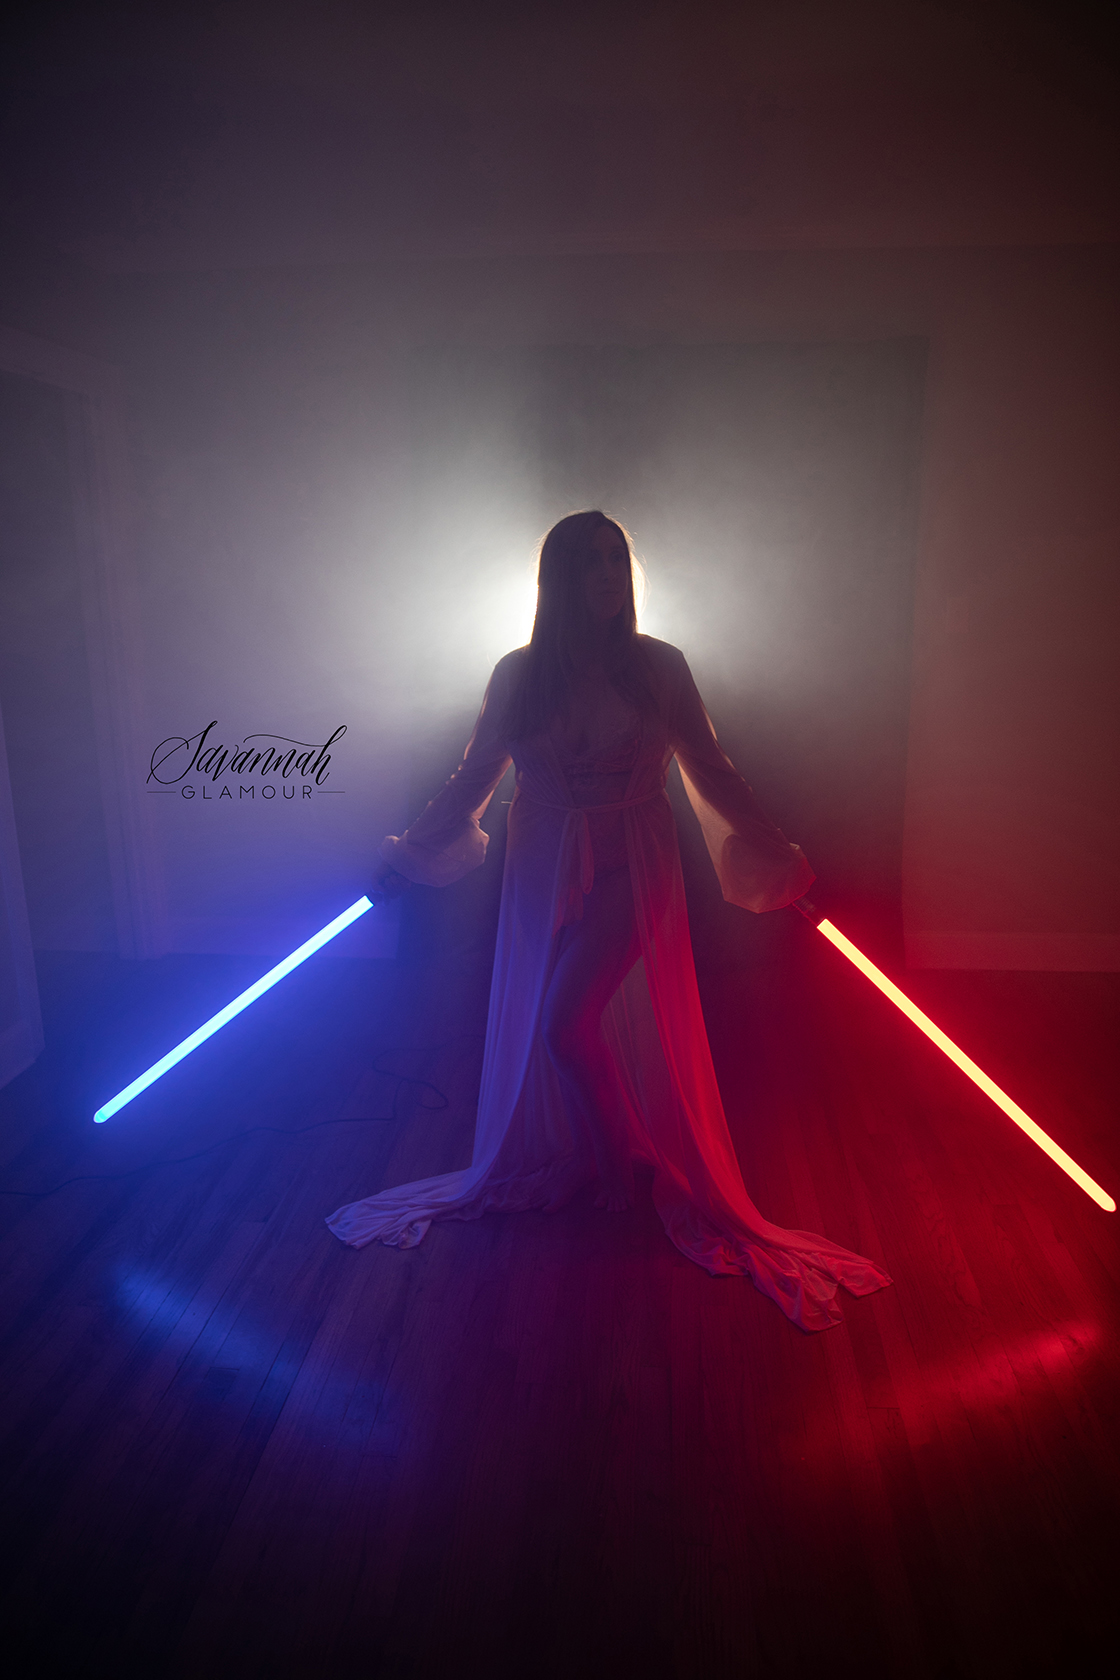 silhouette of a woman holding two lightsabers